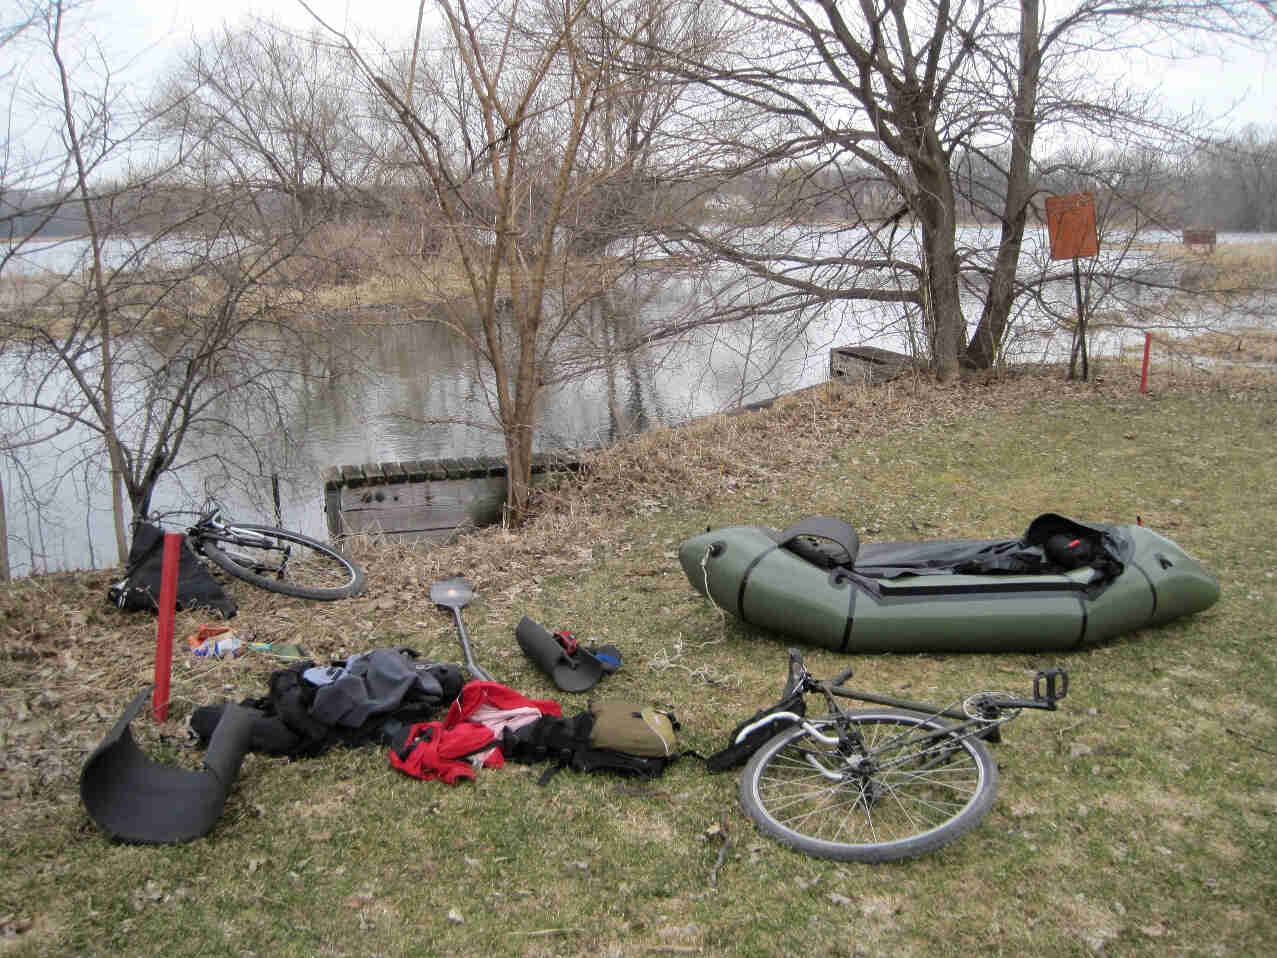 Surly Travelers Check bike parts, an inflatable raft, and gear, on a flat grassy area, with a lake in the background